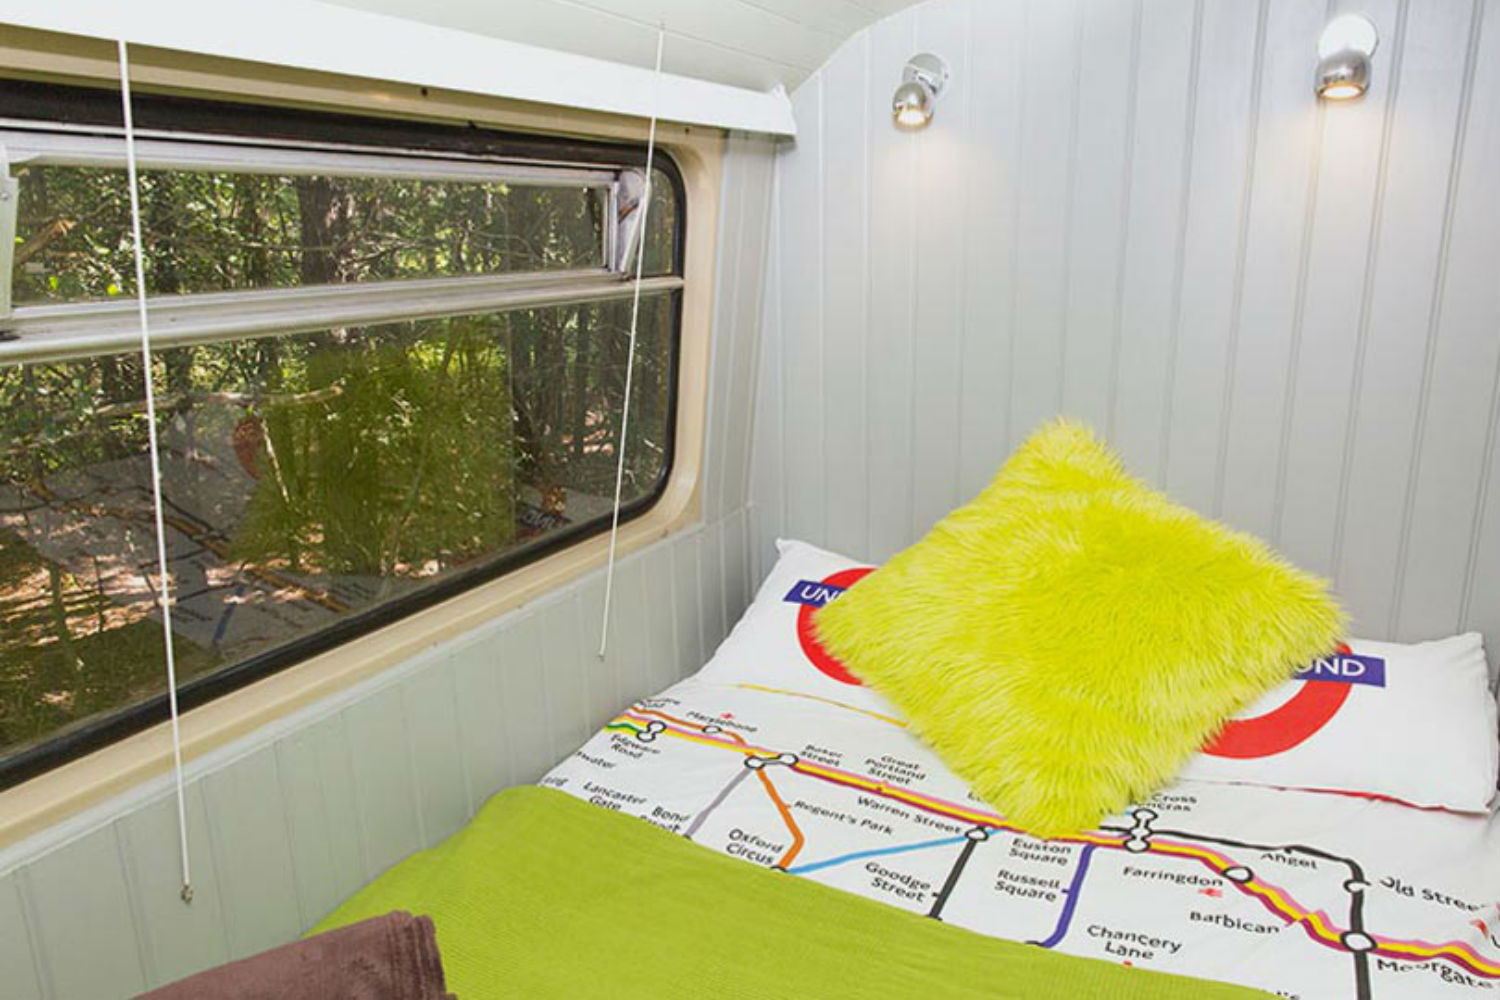 coolest bus to mobile home conversions biggreenbus6